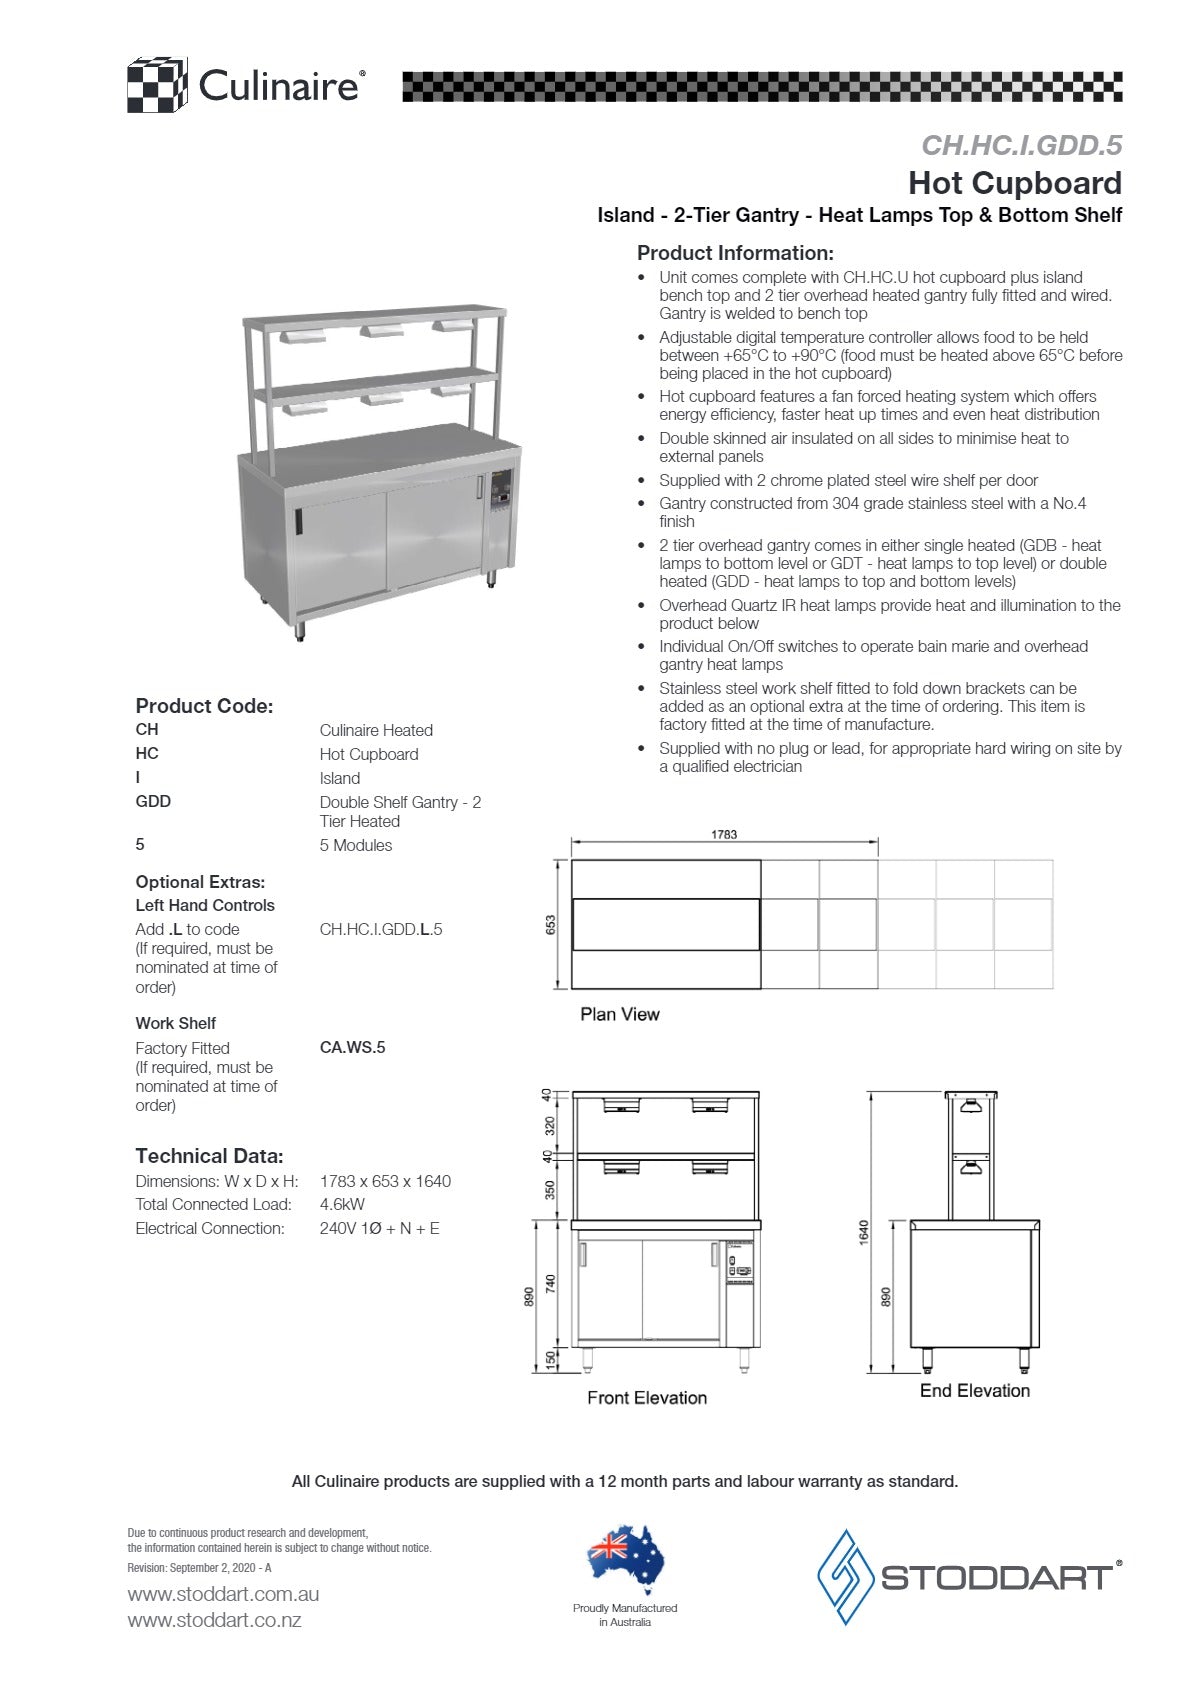 Thumbnail - Culinaire CH.HC.I.GDD.5 - Hot Cupboard Island With Double Gantry & Heat Lamps